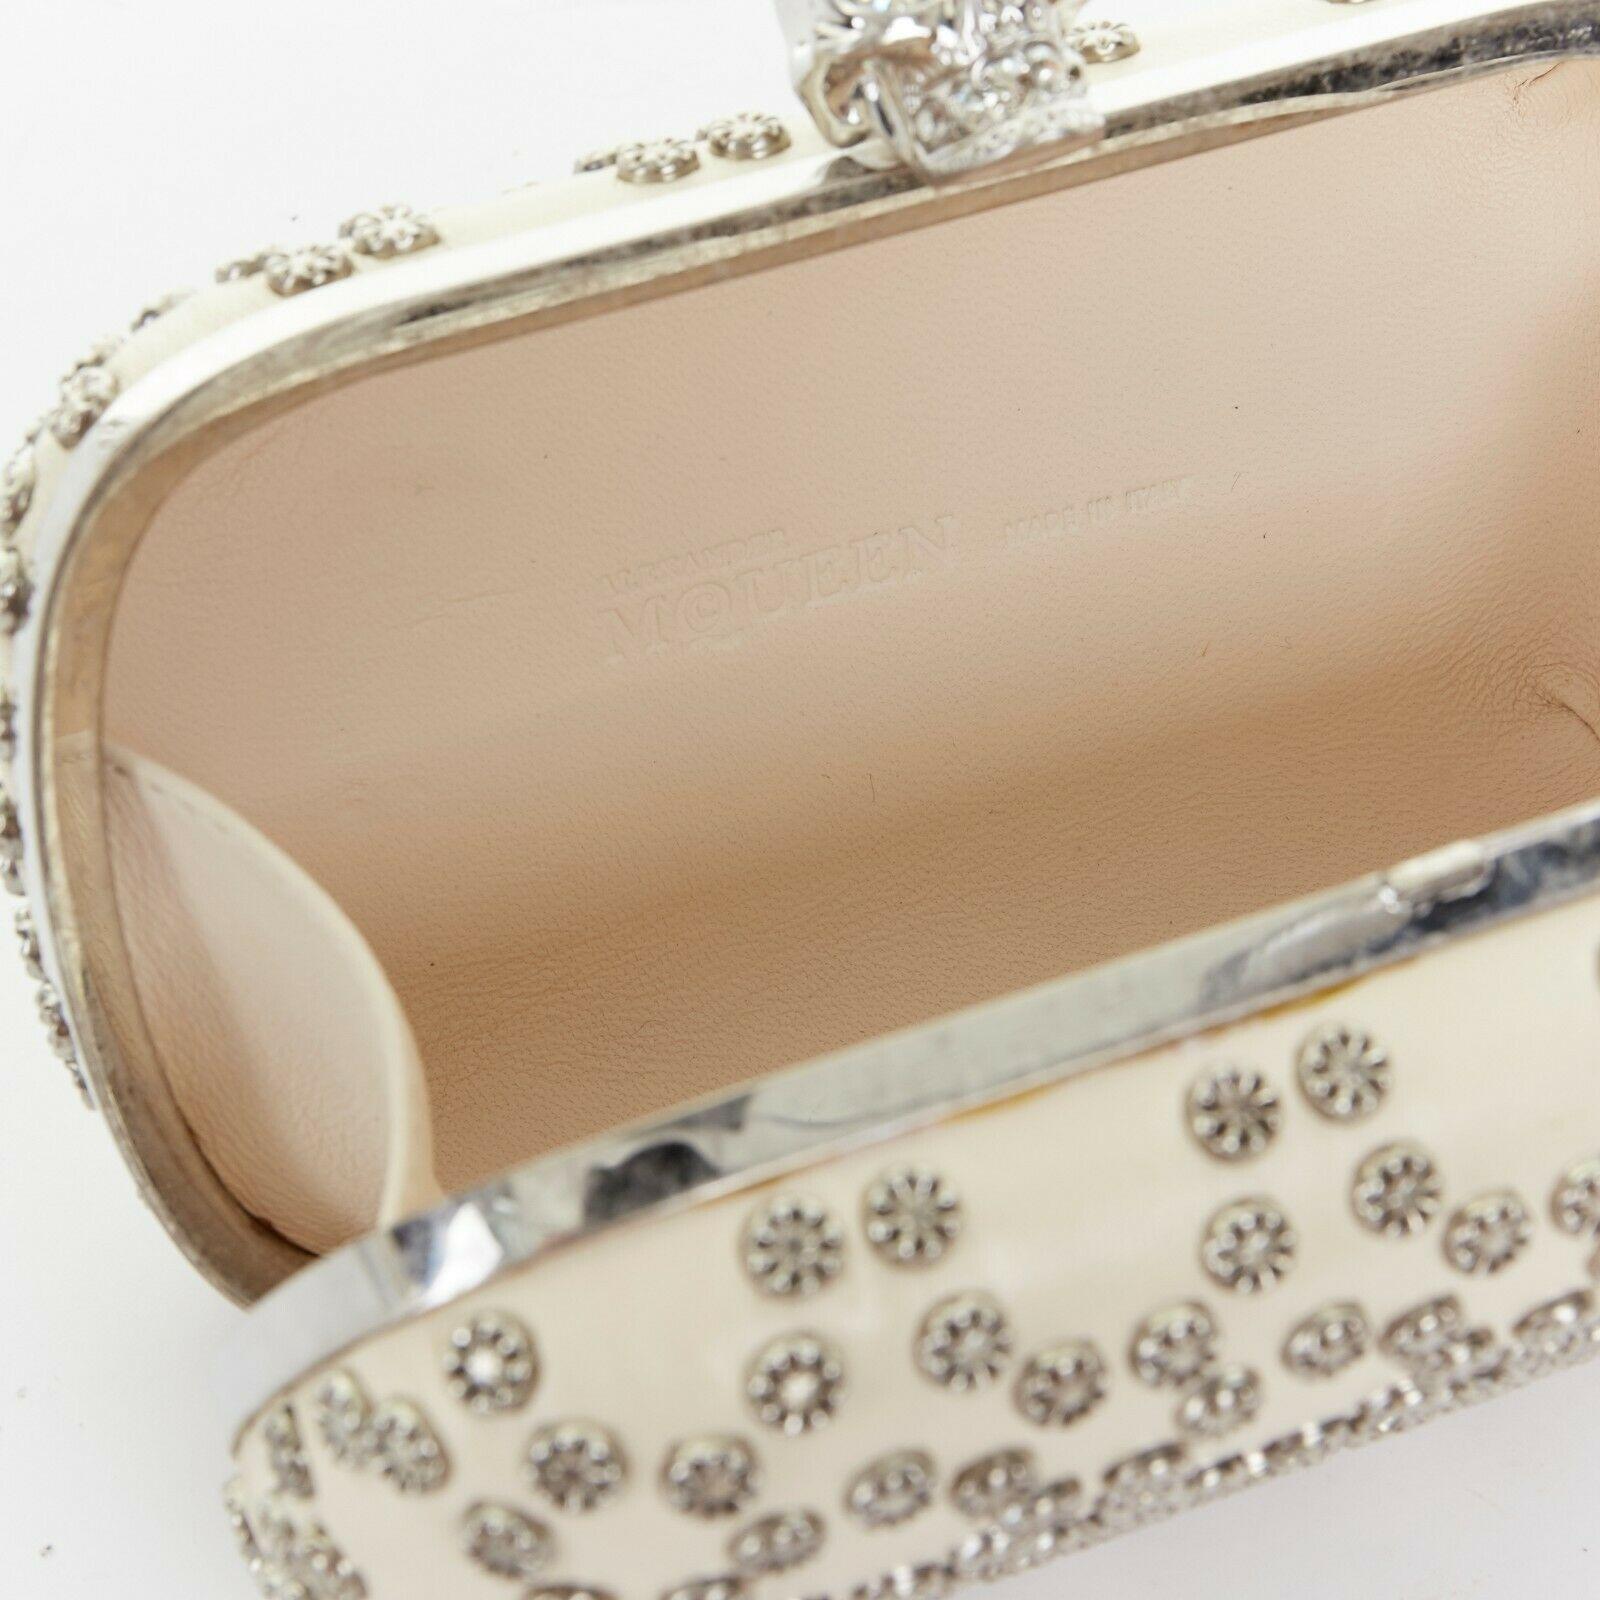 ALEXANDER MCQUEEN cream leather silver stud crystal embellished skull box clutch 3